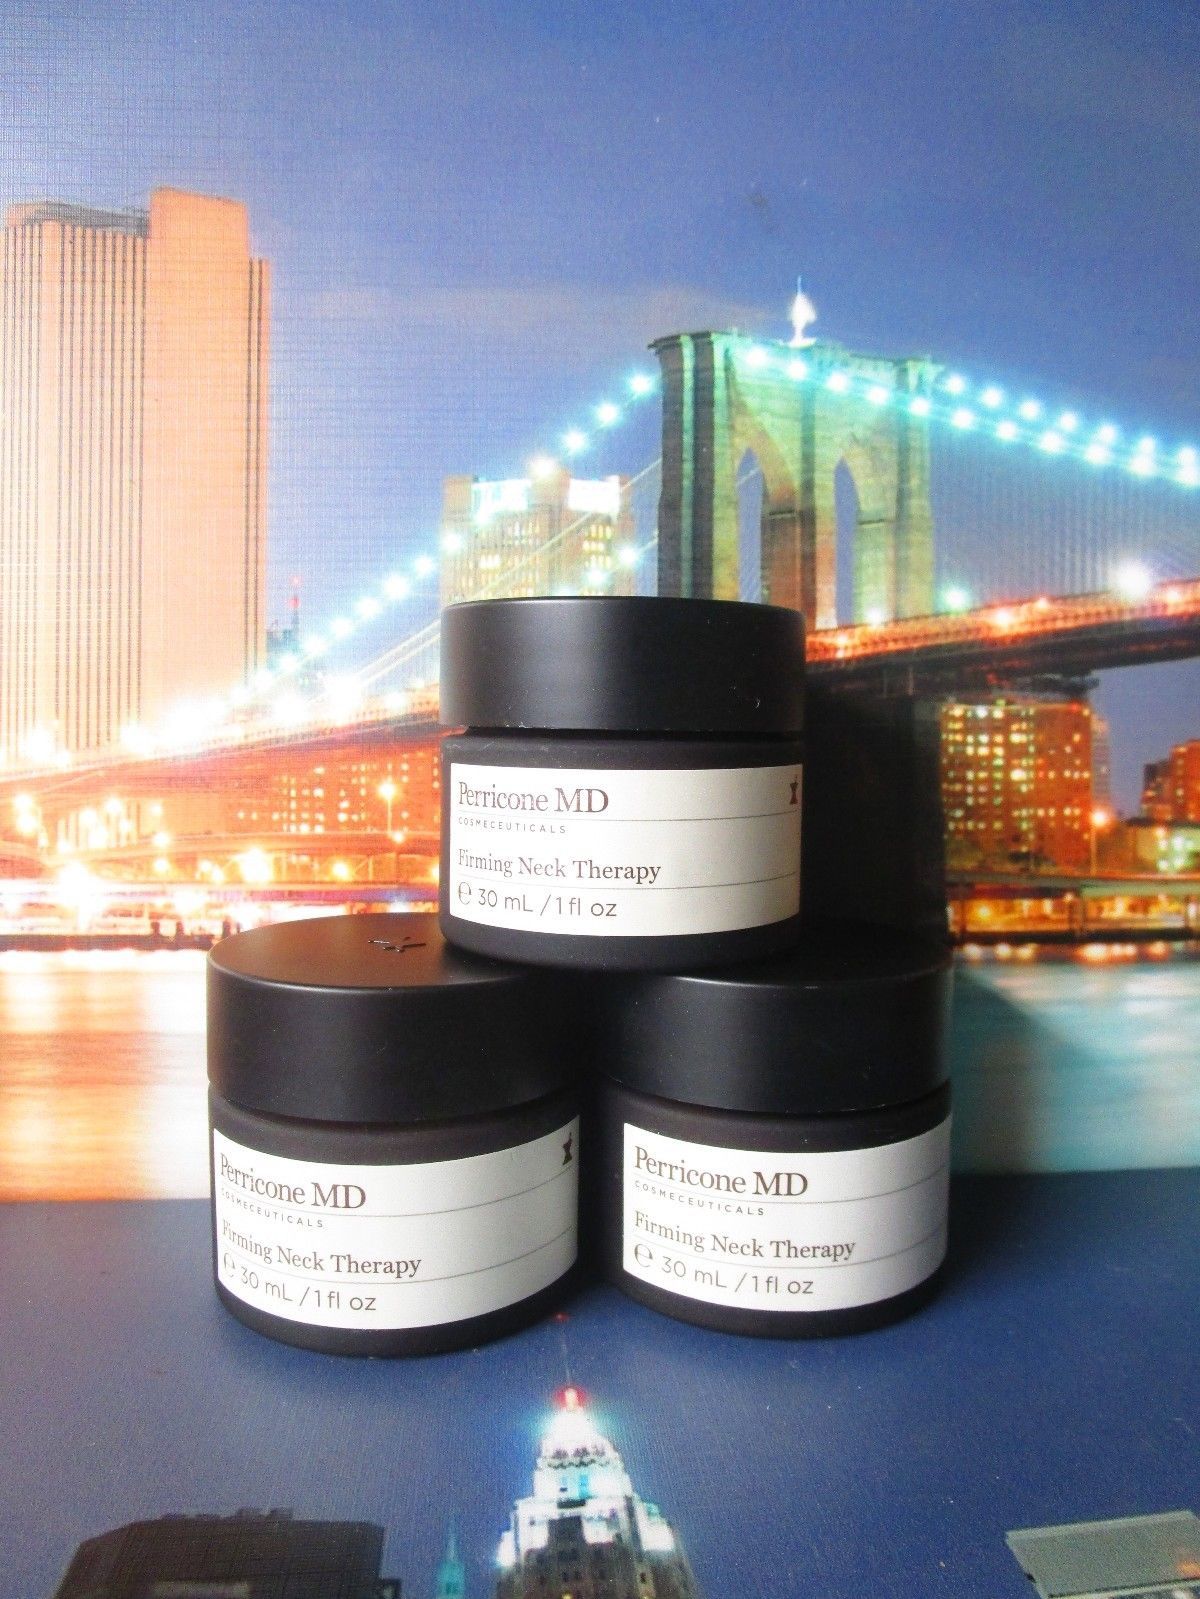 PERRICONE MD LOT OF 3 FIRMING NECK THERAPY 1 OZ EACH - $55.17